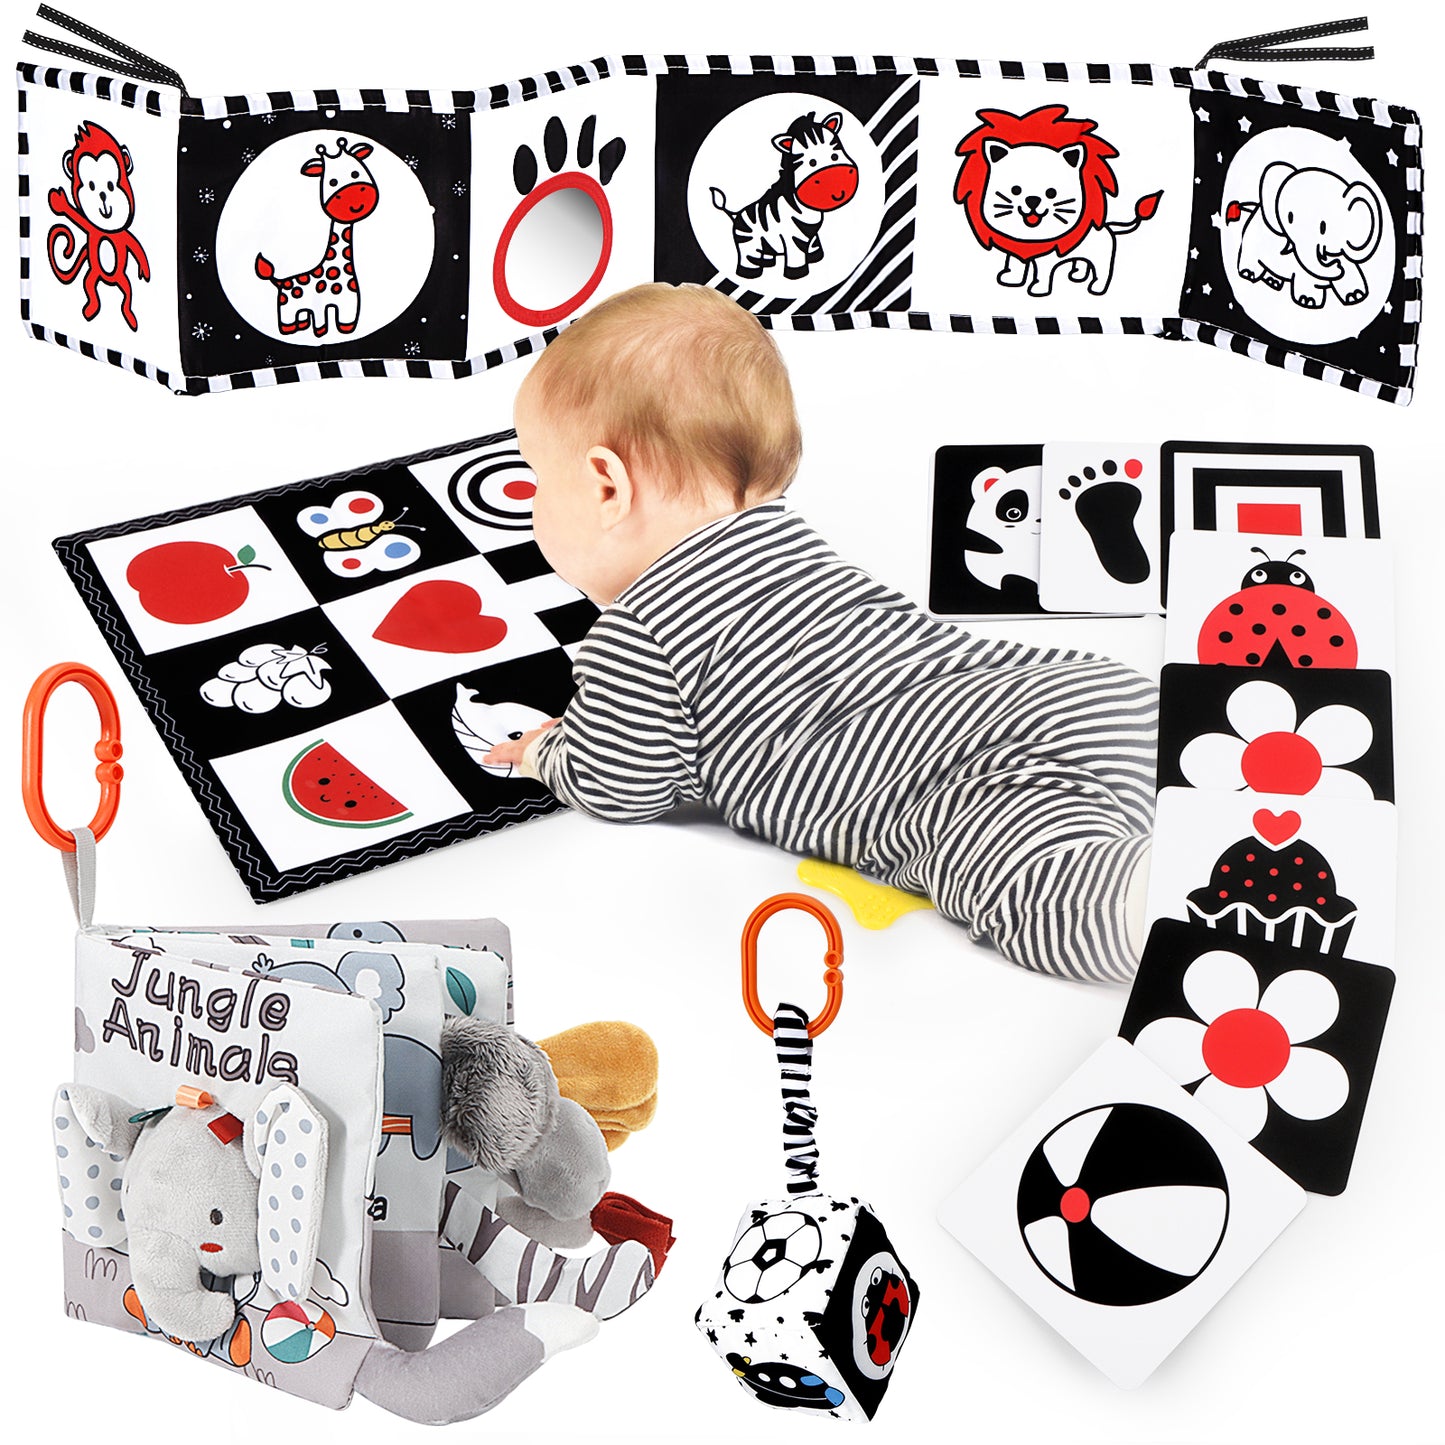 Baby Visual Stimulation Cards, 5.5'' x 5.5'' Black and White Baby Vision  Trigger Cards, Infant Visual Stimulation Cards, Sensory Development  High-Contrast Flash Cards for Babies Ages 0-3 Months